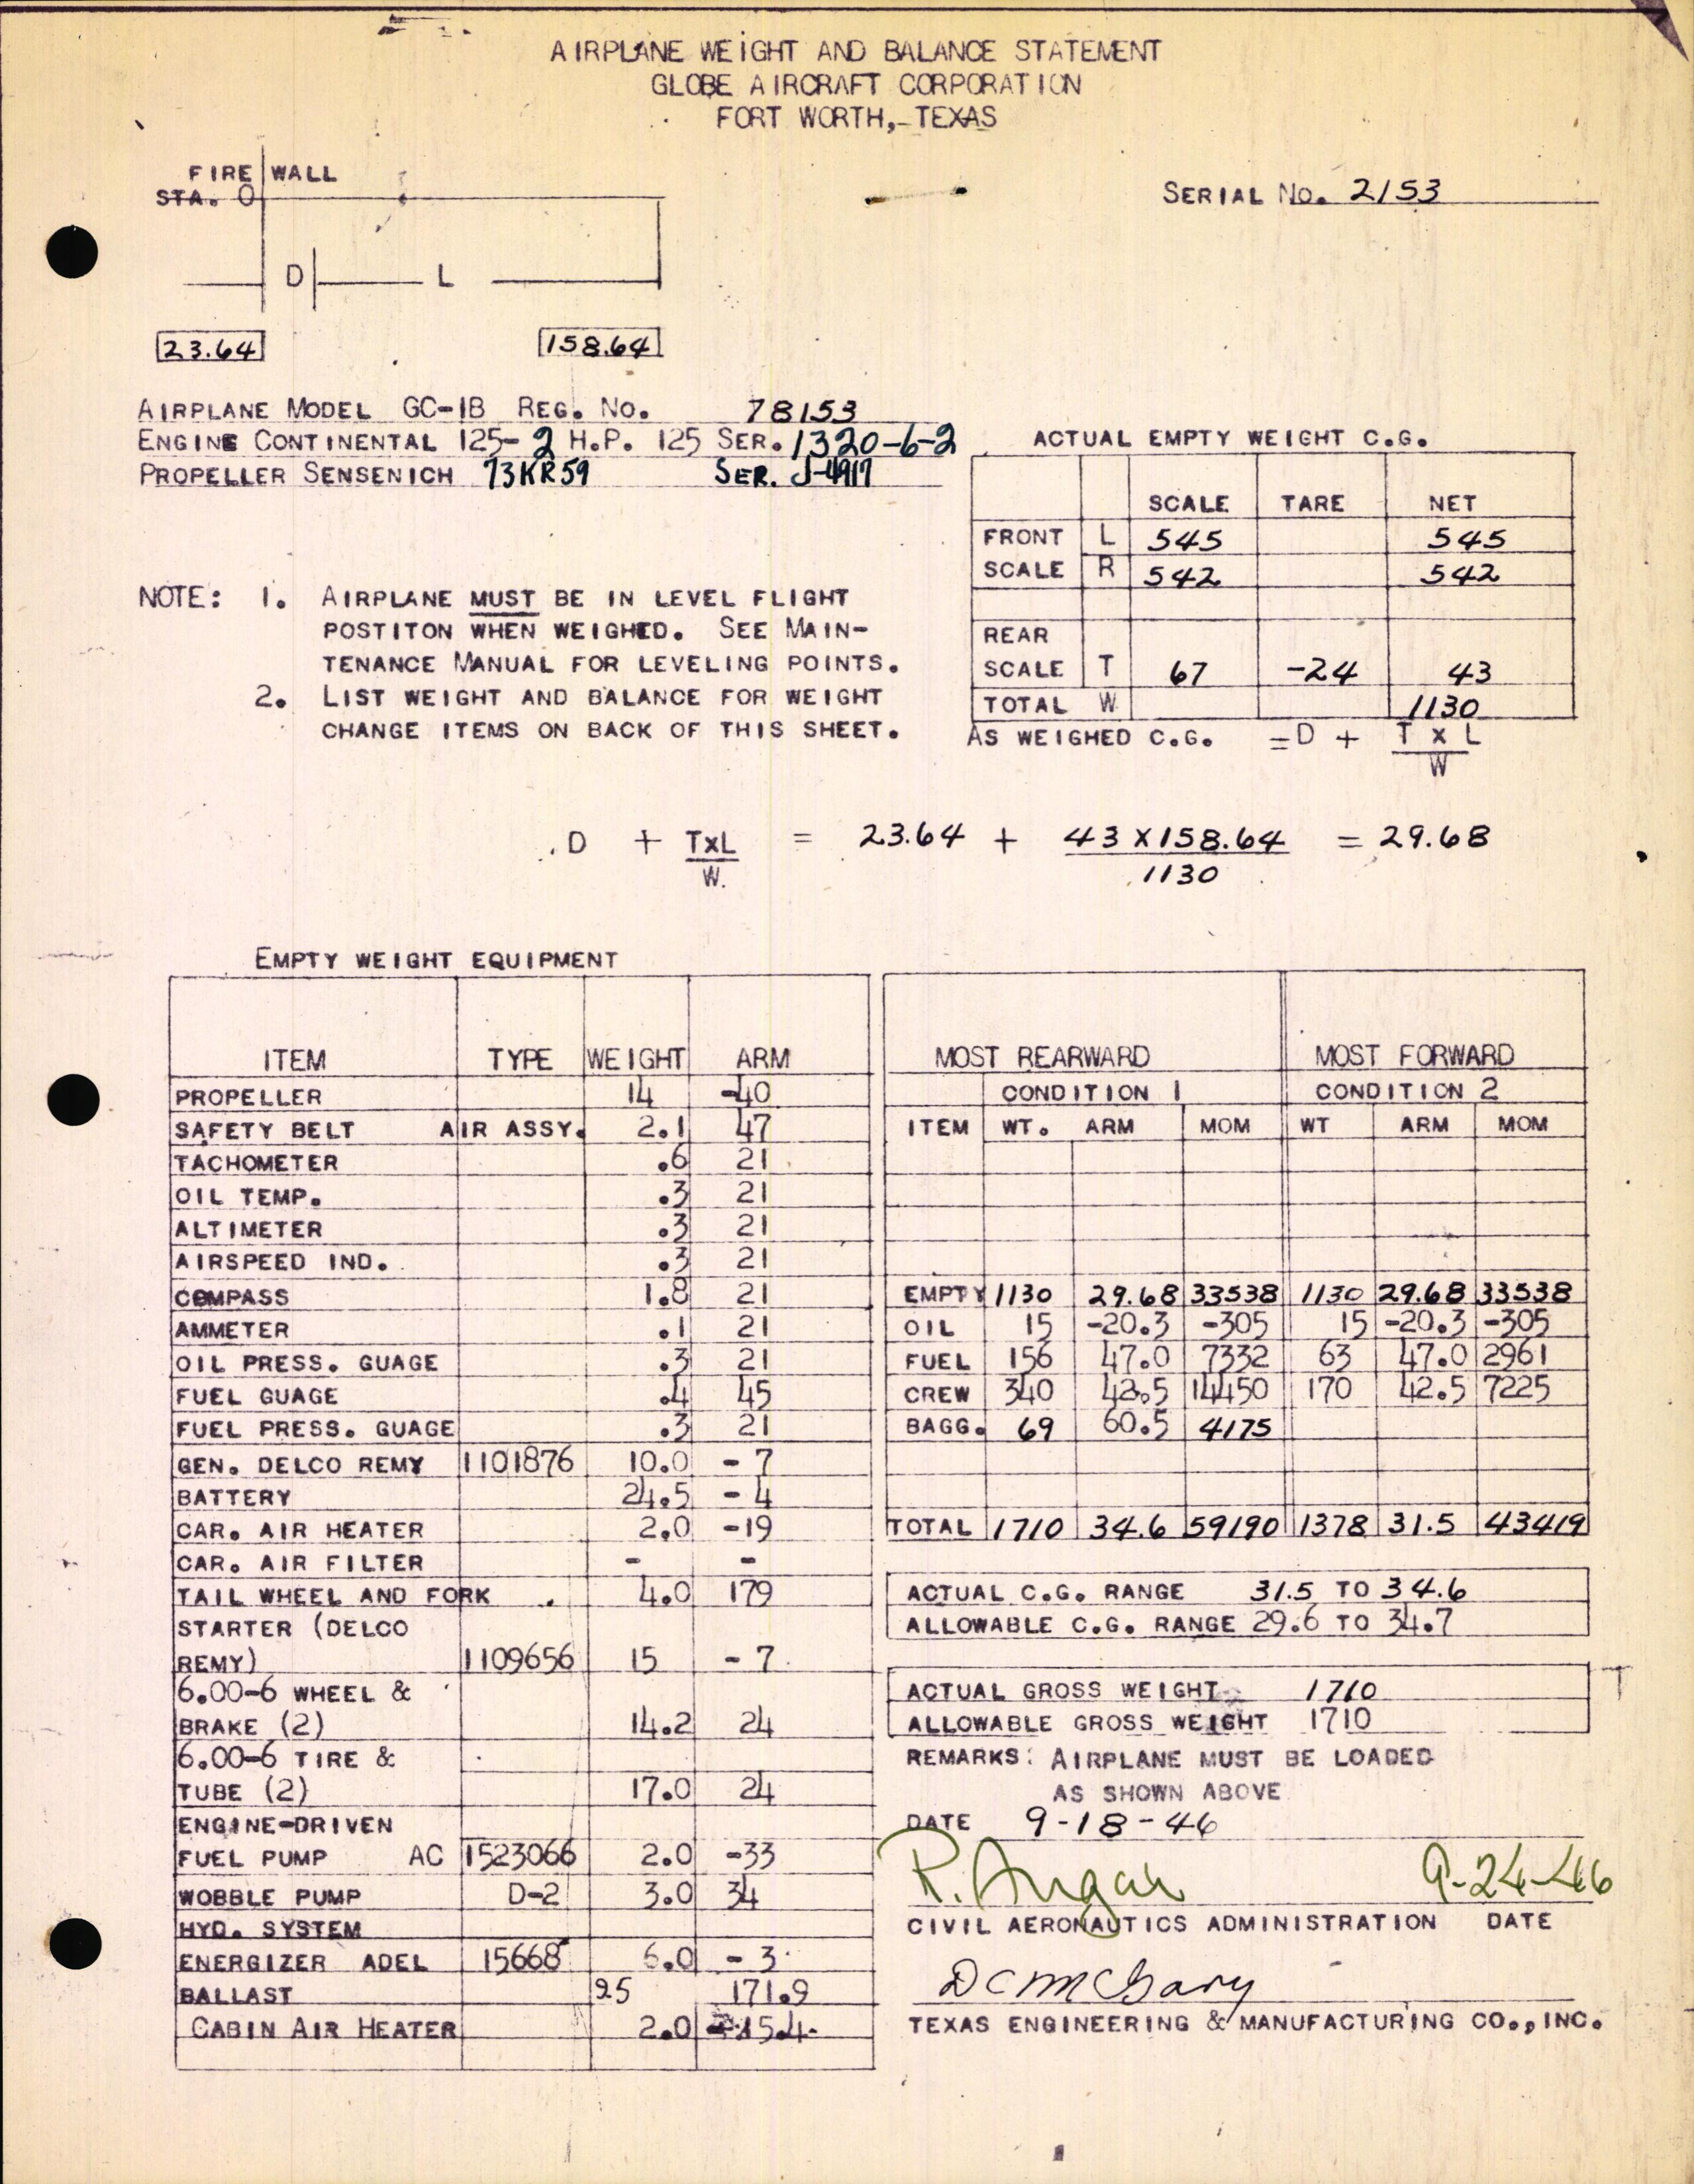 Sample page 3 from AirCorps Library document: Technical Information for Serial Number 2153